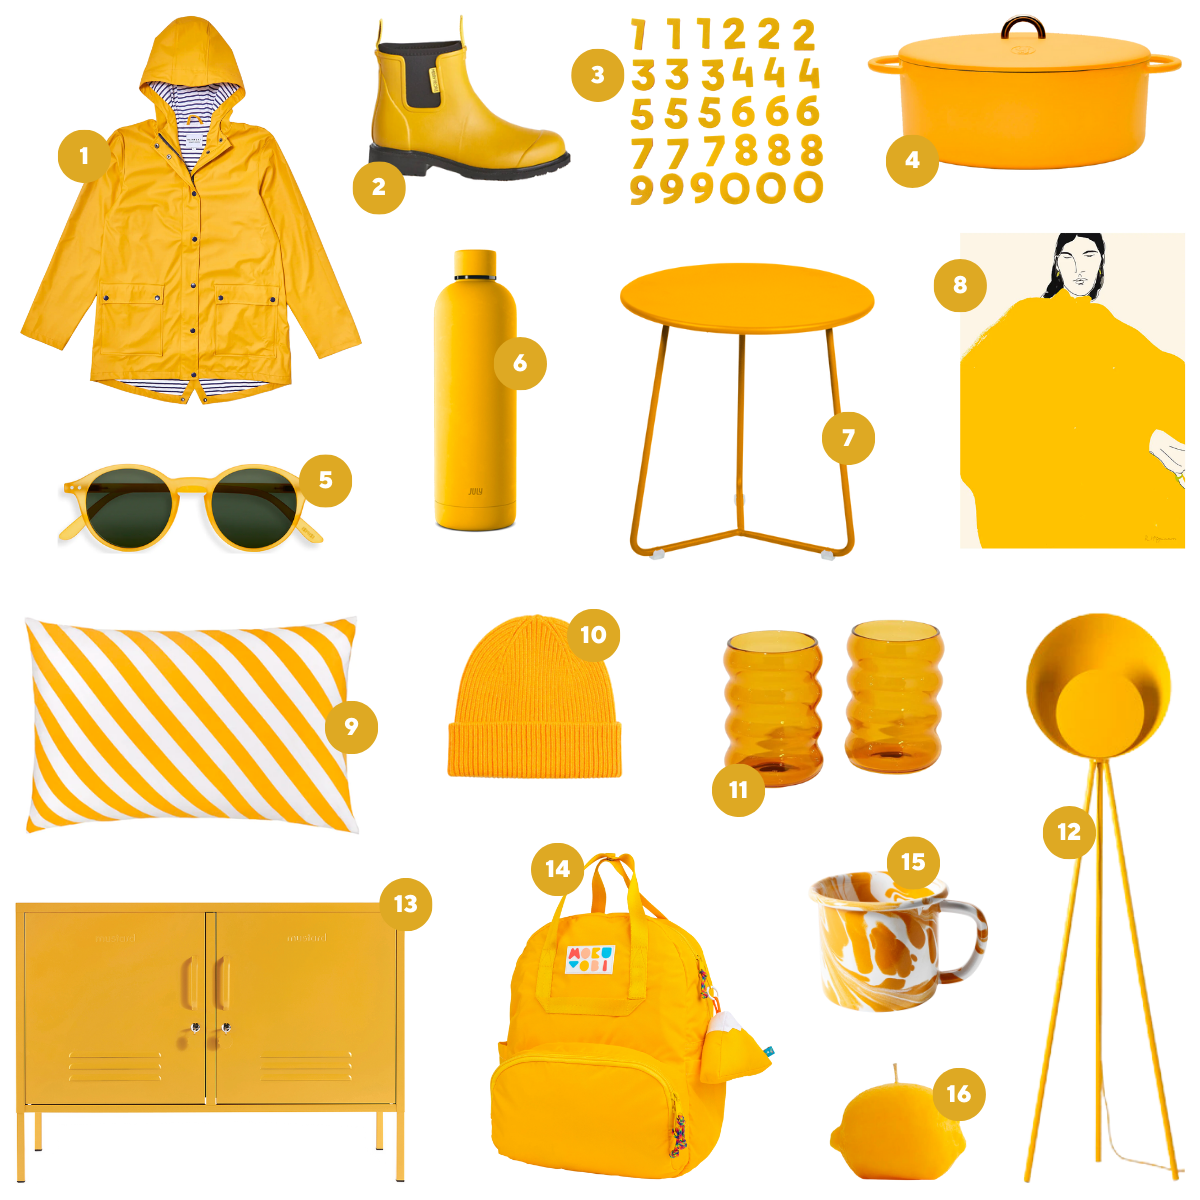 A collage of 16 images shows Mustard yellow coloured fashion and homewares, including a locker, sunglasses and a raincoat.